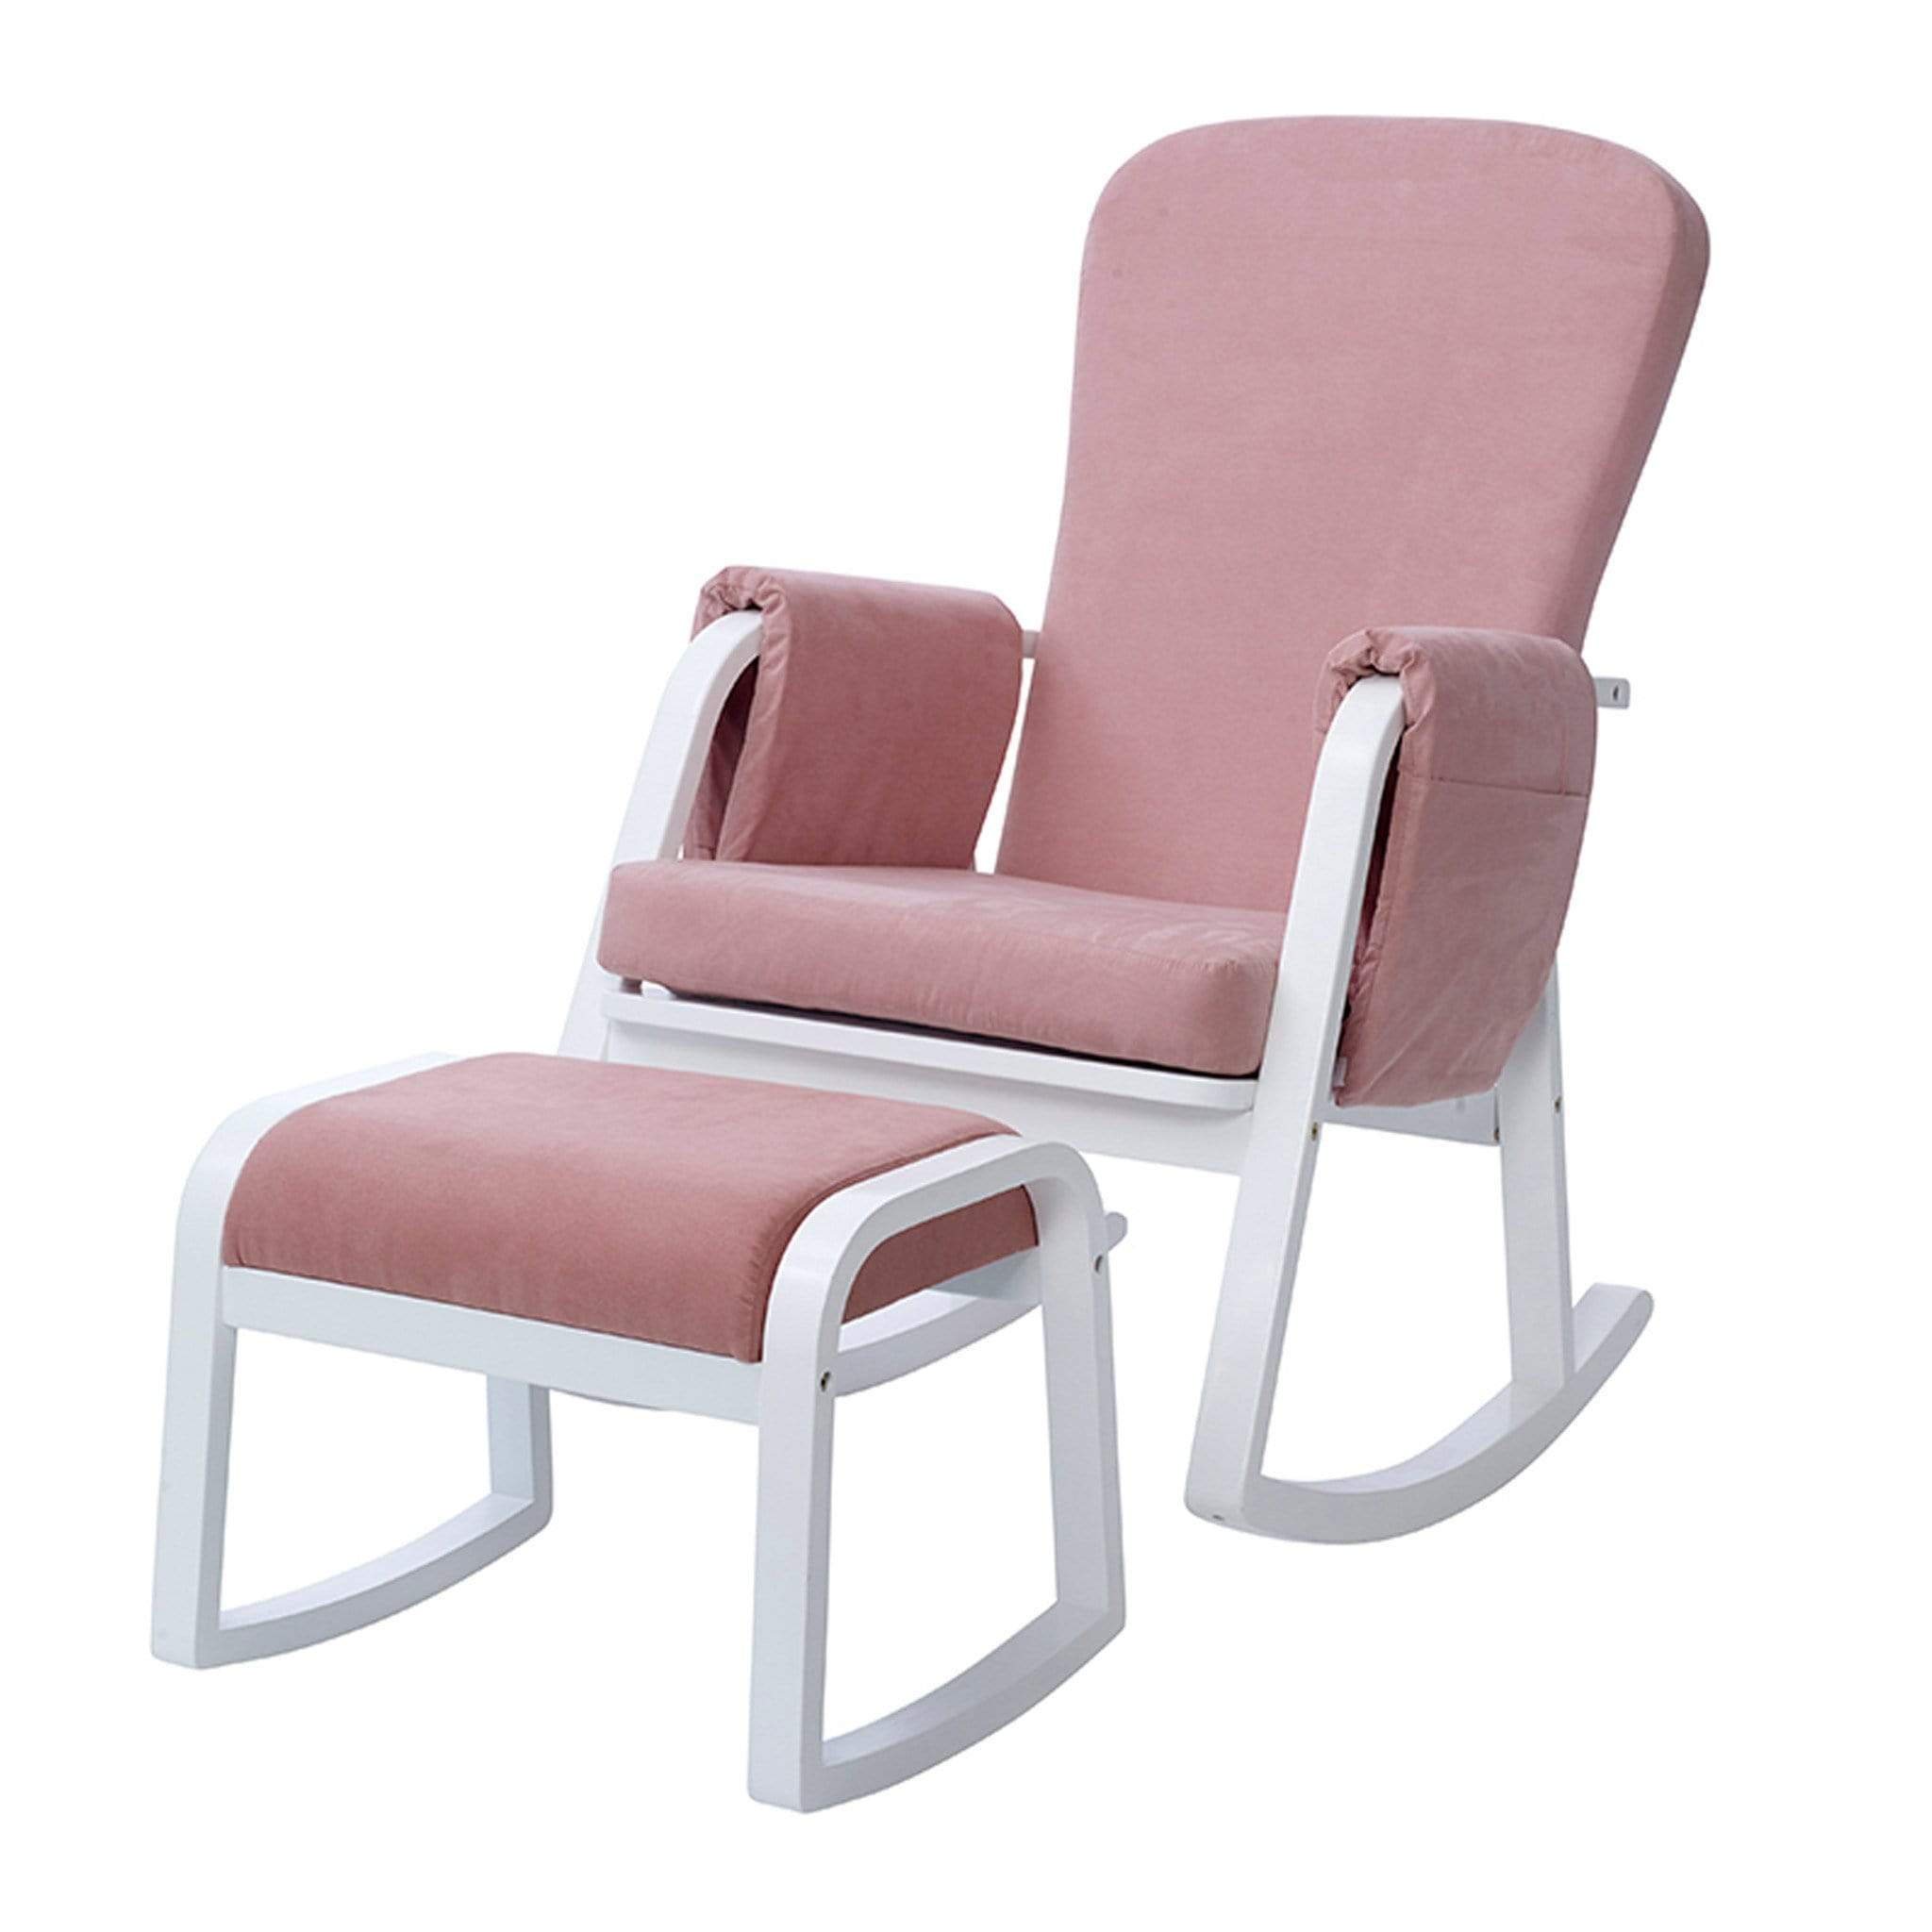 Ickle Bubba nursing chairs Ickle Bubba Dursley Rocking Chair and Stool Blush Pink 48-005-000-841